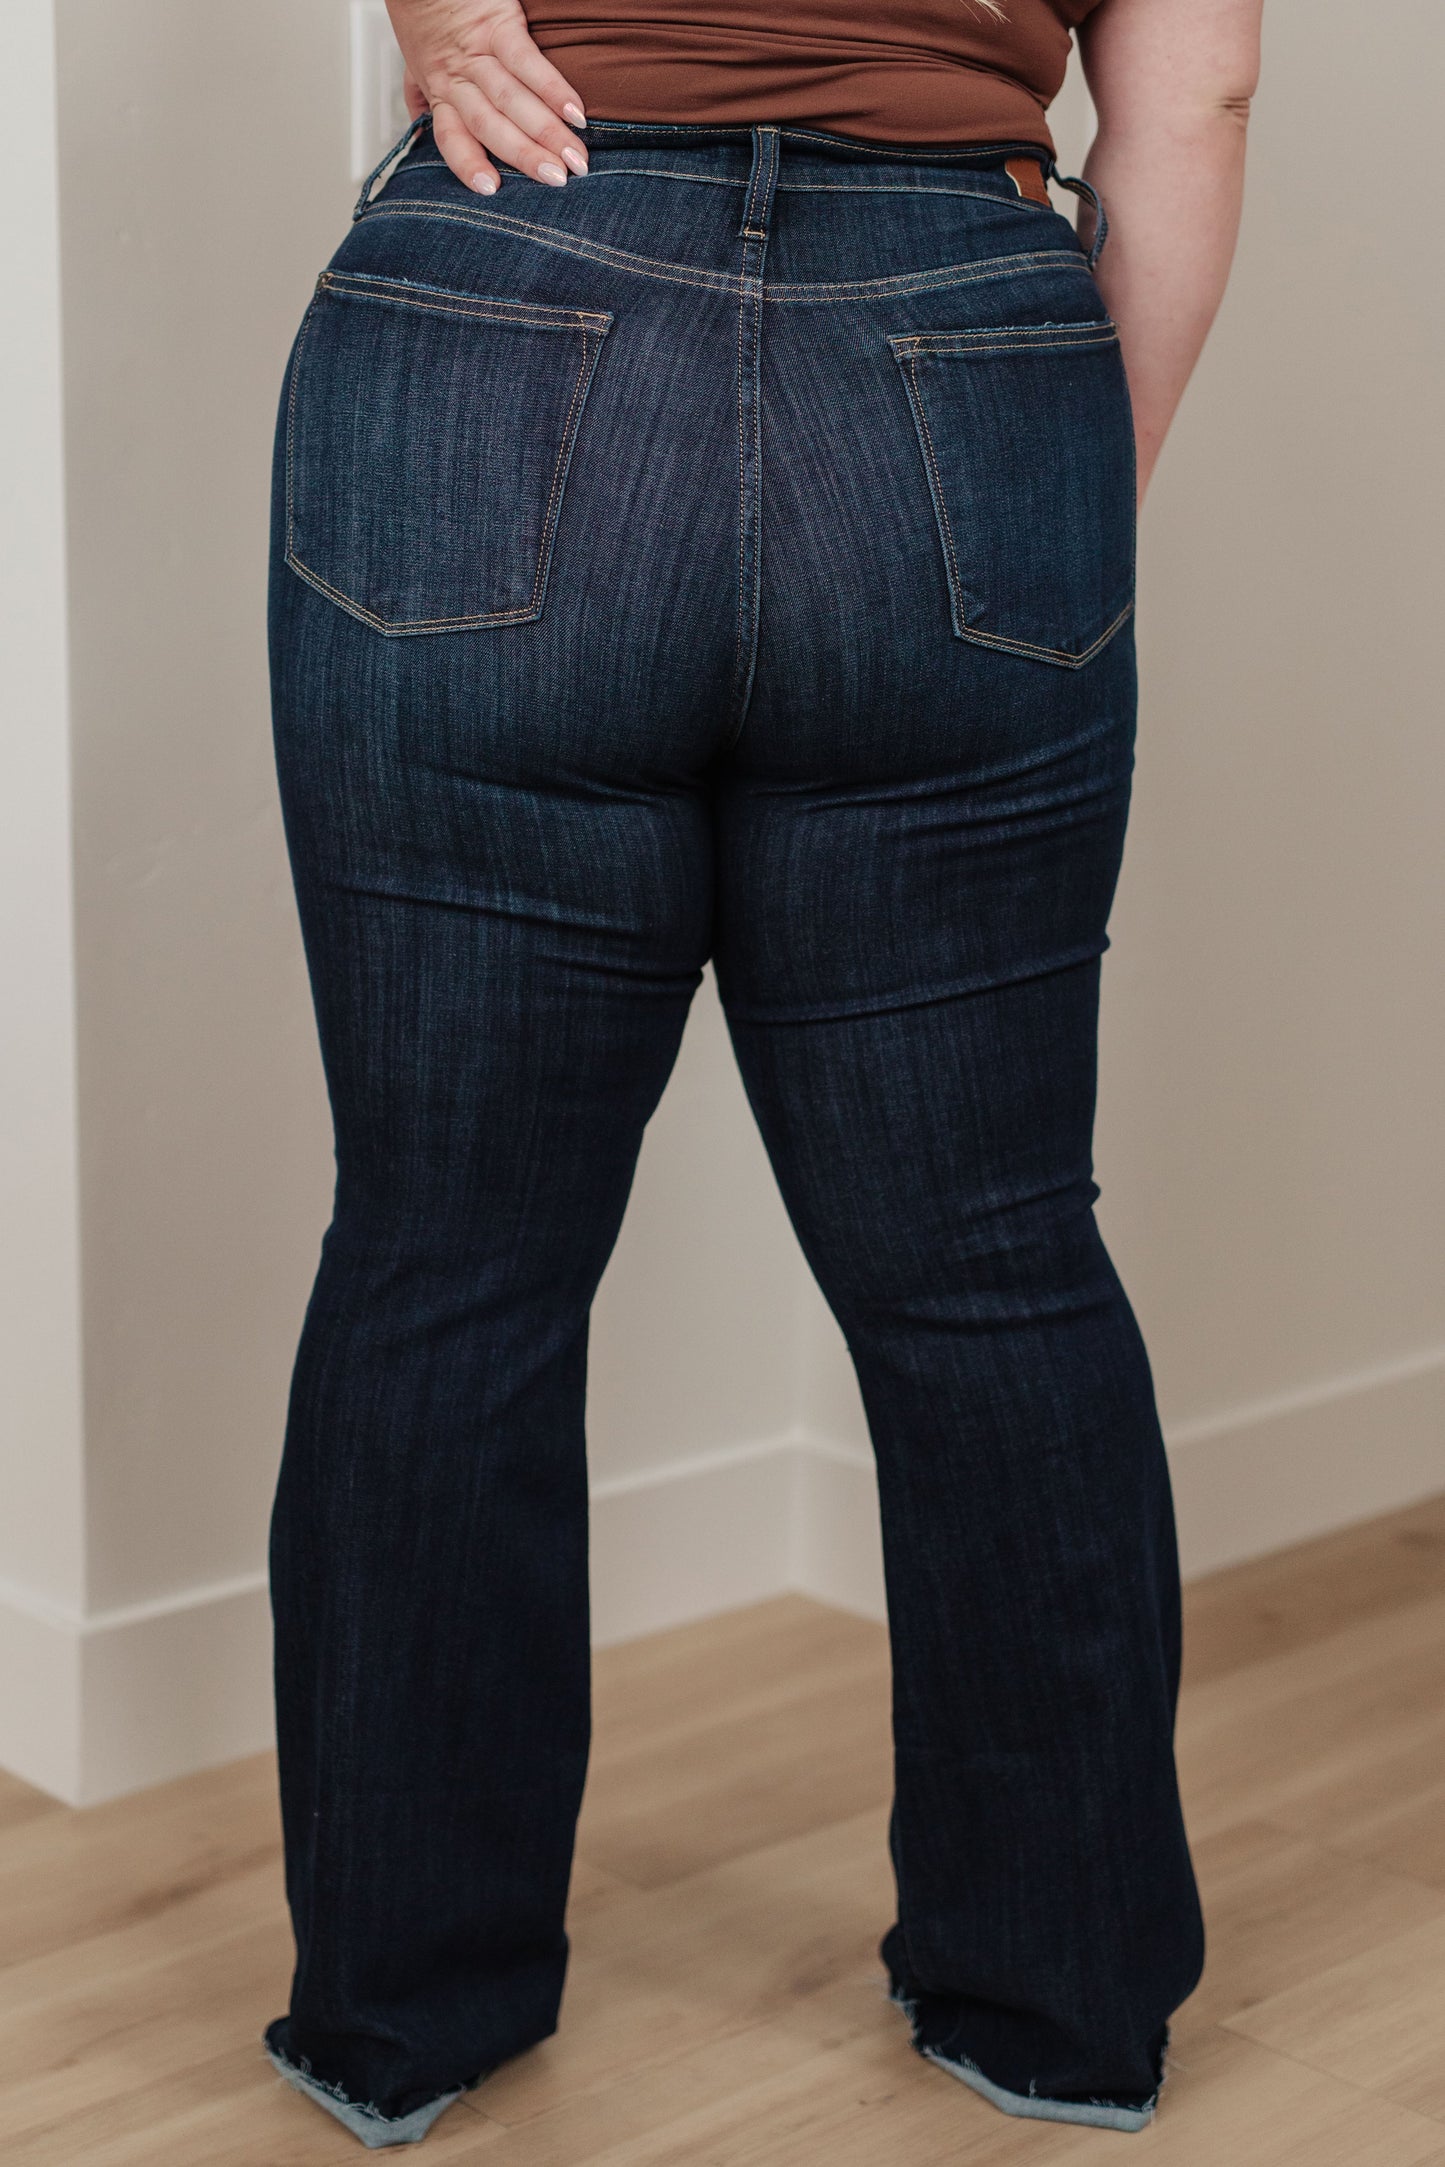 Our Jane High Rise Raw Hem Flare Jeans from Judy Blue are the perfect piece for any wardrobe. The high-rise design offers increased coverage, while the dark wash, classic flared silhouette and raw hem provide a timeless and effortless look. A great addition to any outfit. 0 - 24W